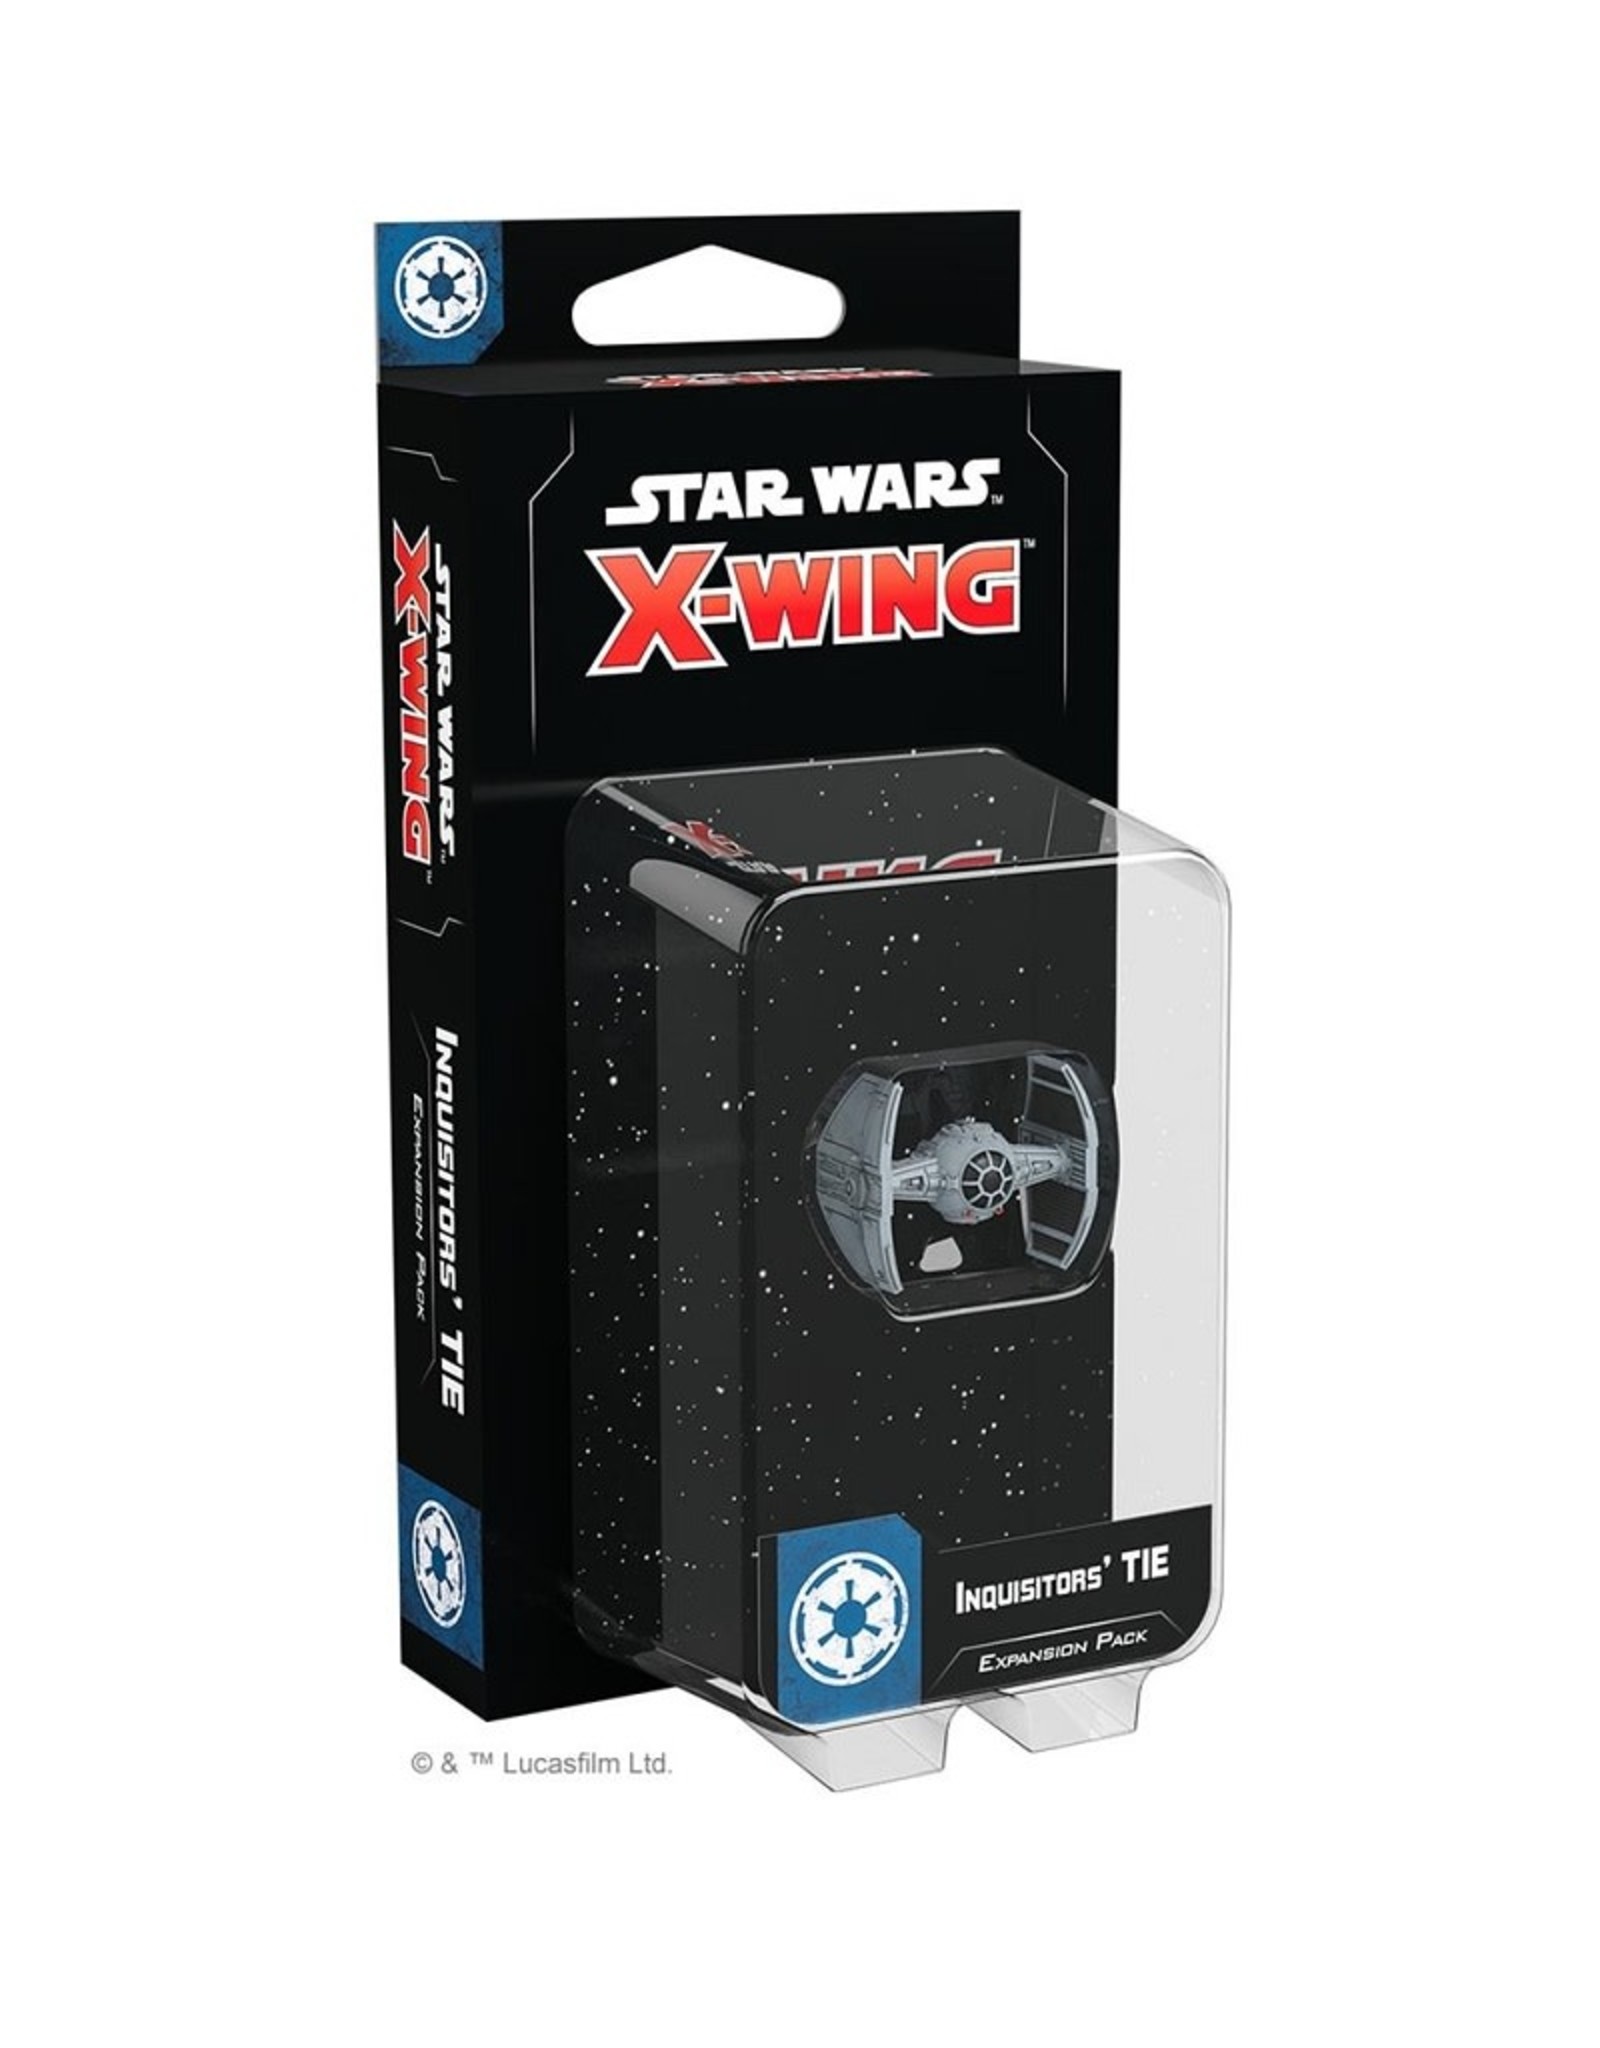 Atomic Mass Games (S/O) Star Wars X-Wing: Inquisitors' TIE - 2nd Edition